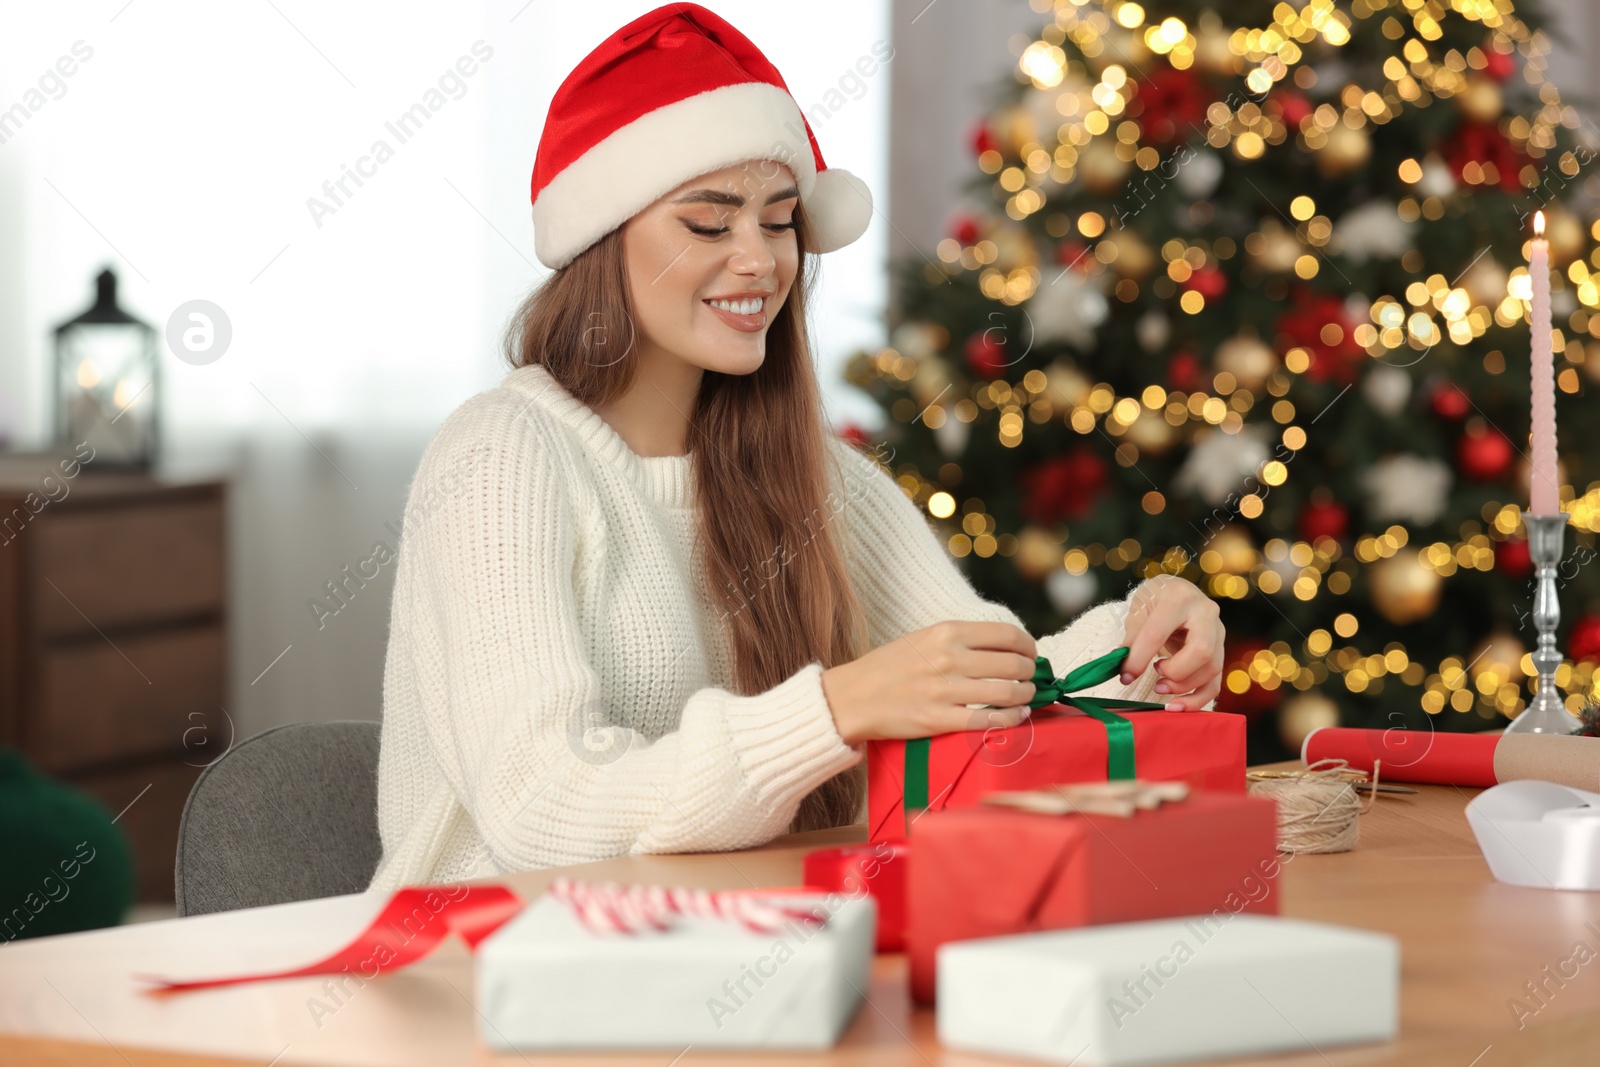 Photo of Beautiful young woman decorating Christmas gift at table in room